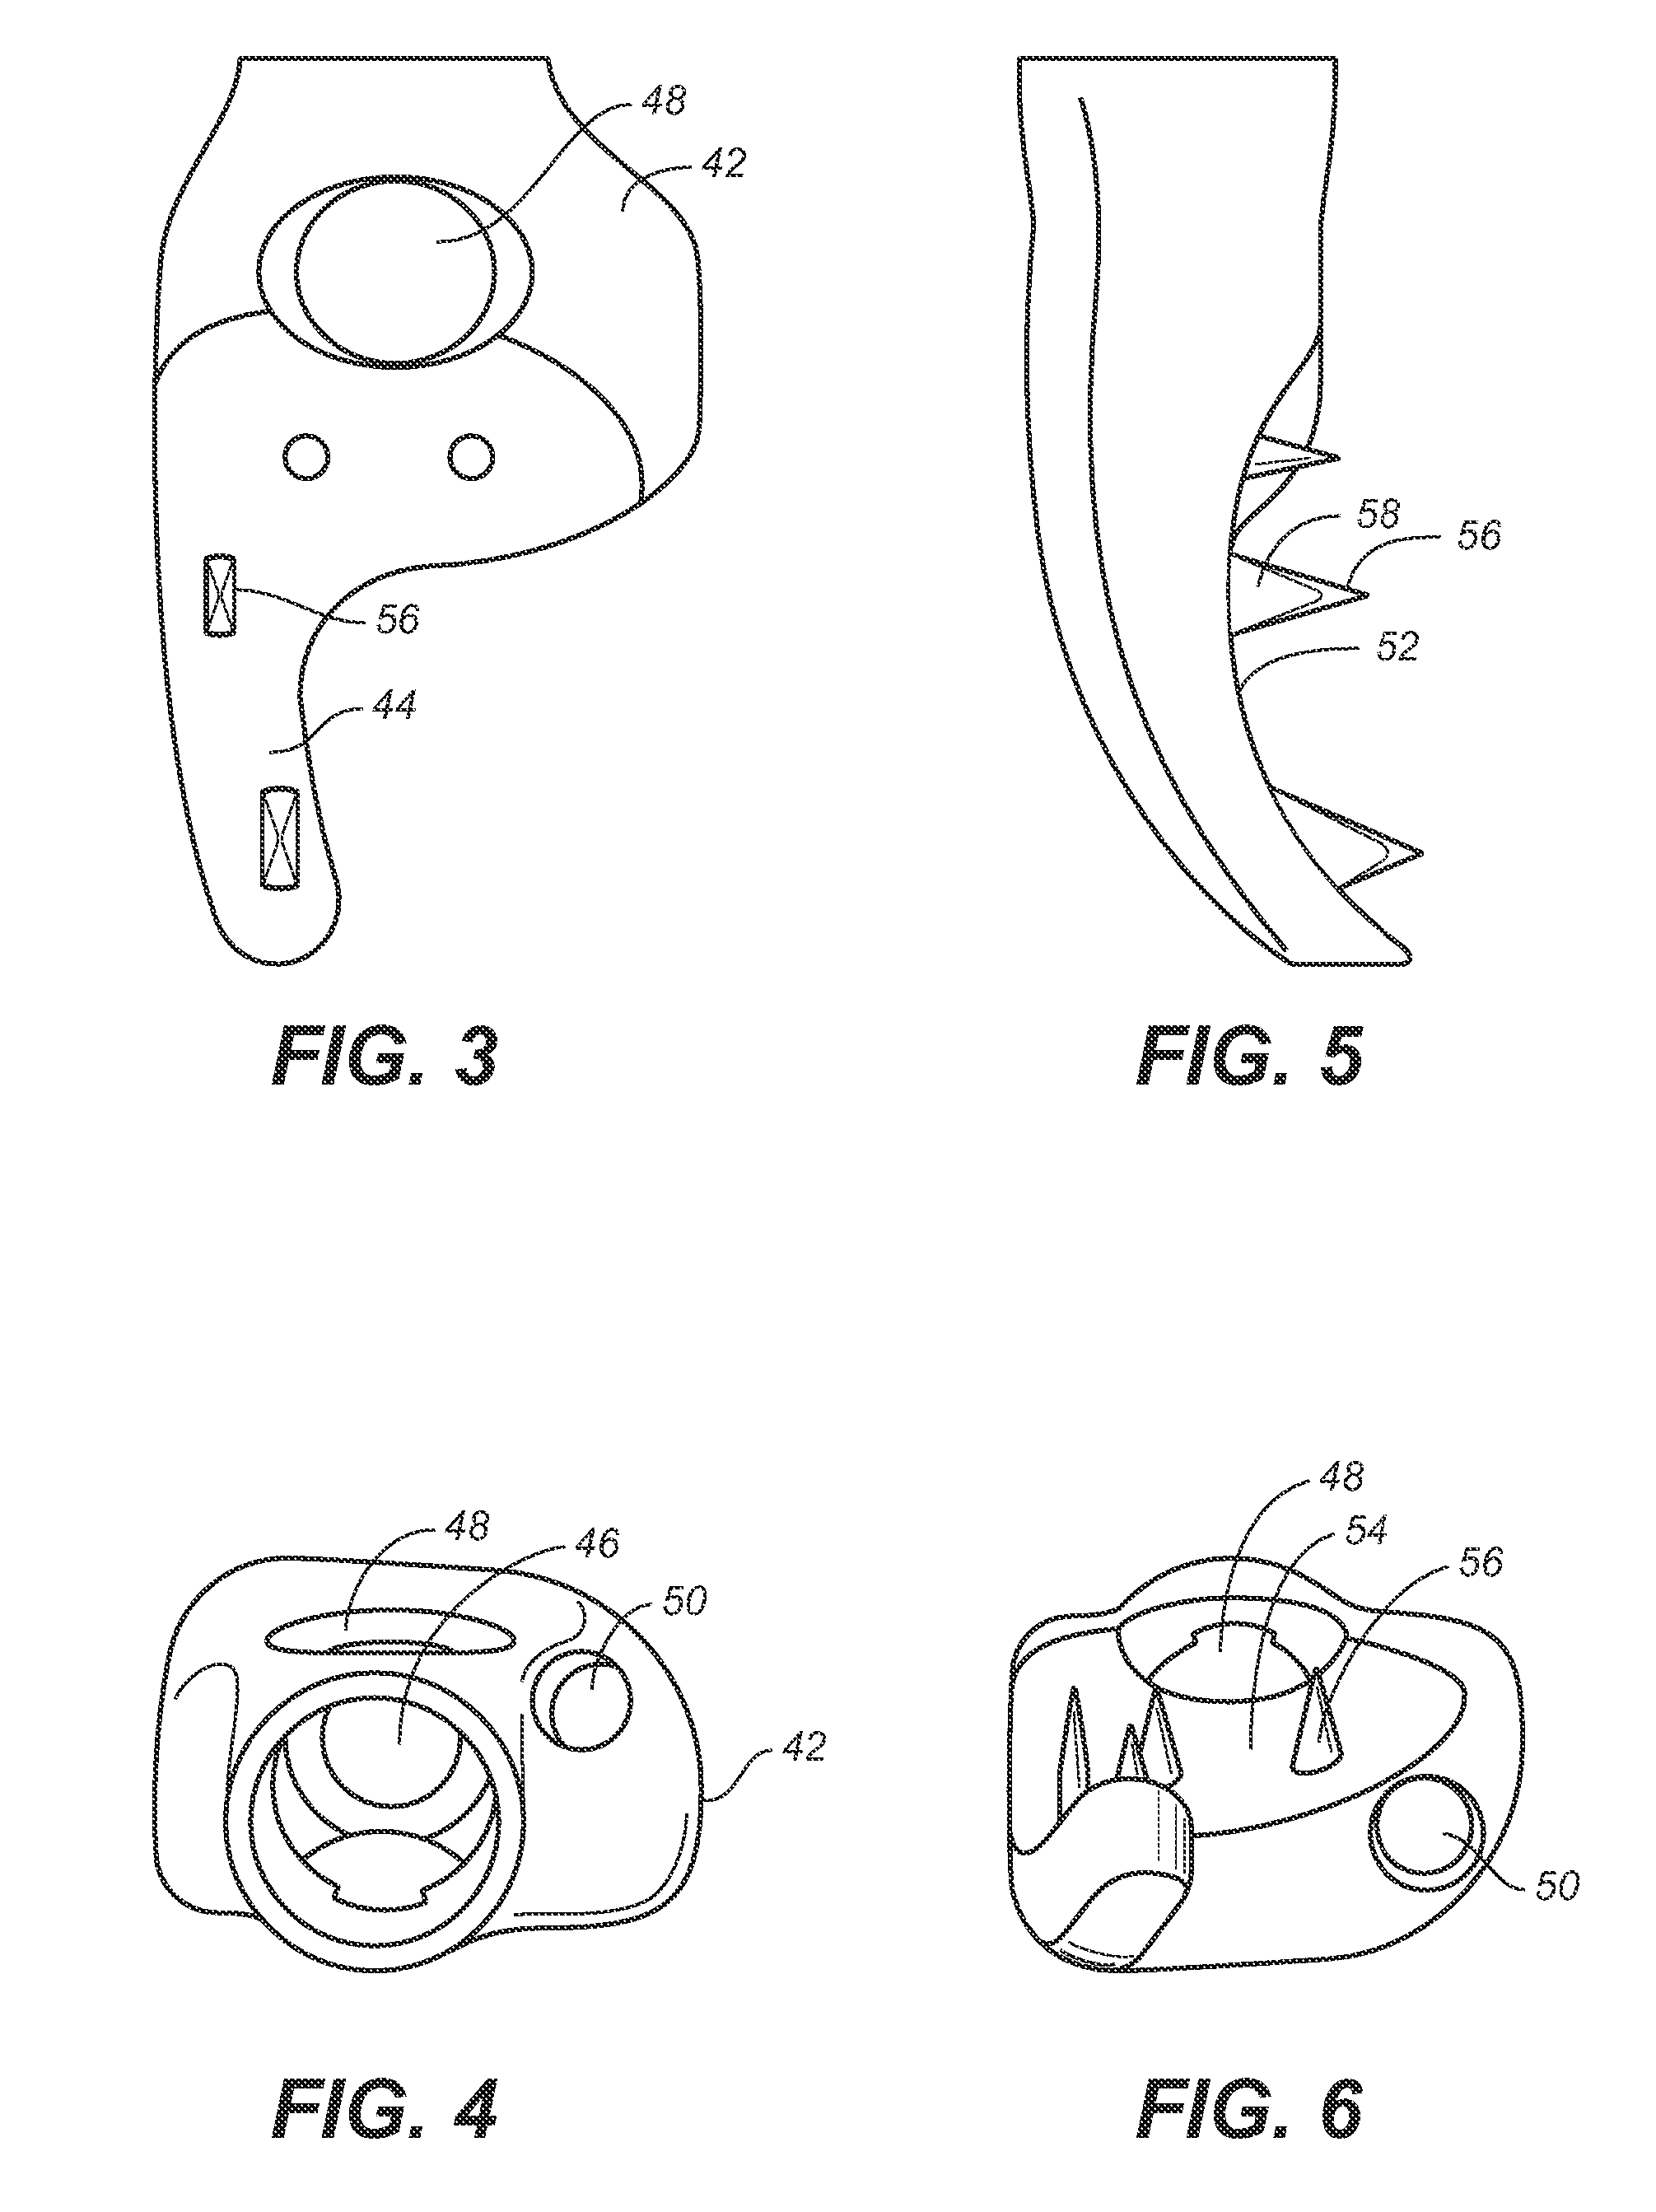 Implant system and method to treat degenerative disorders of the spine